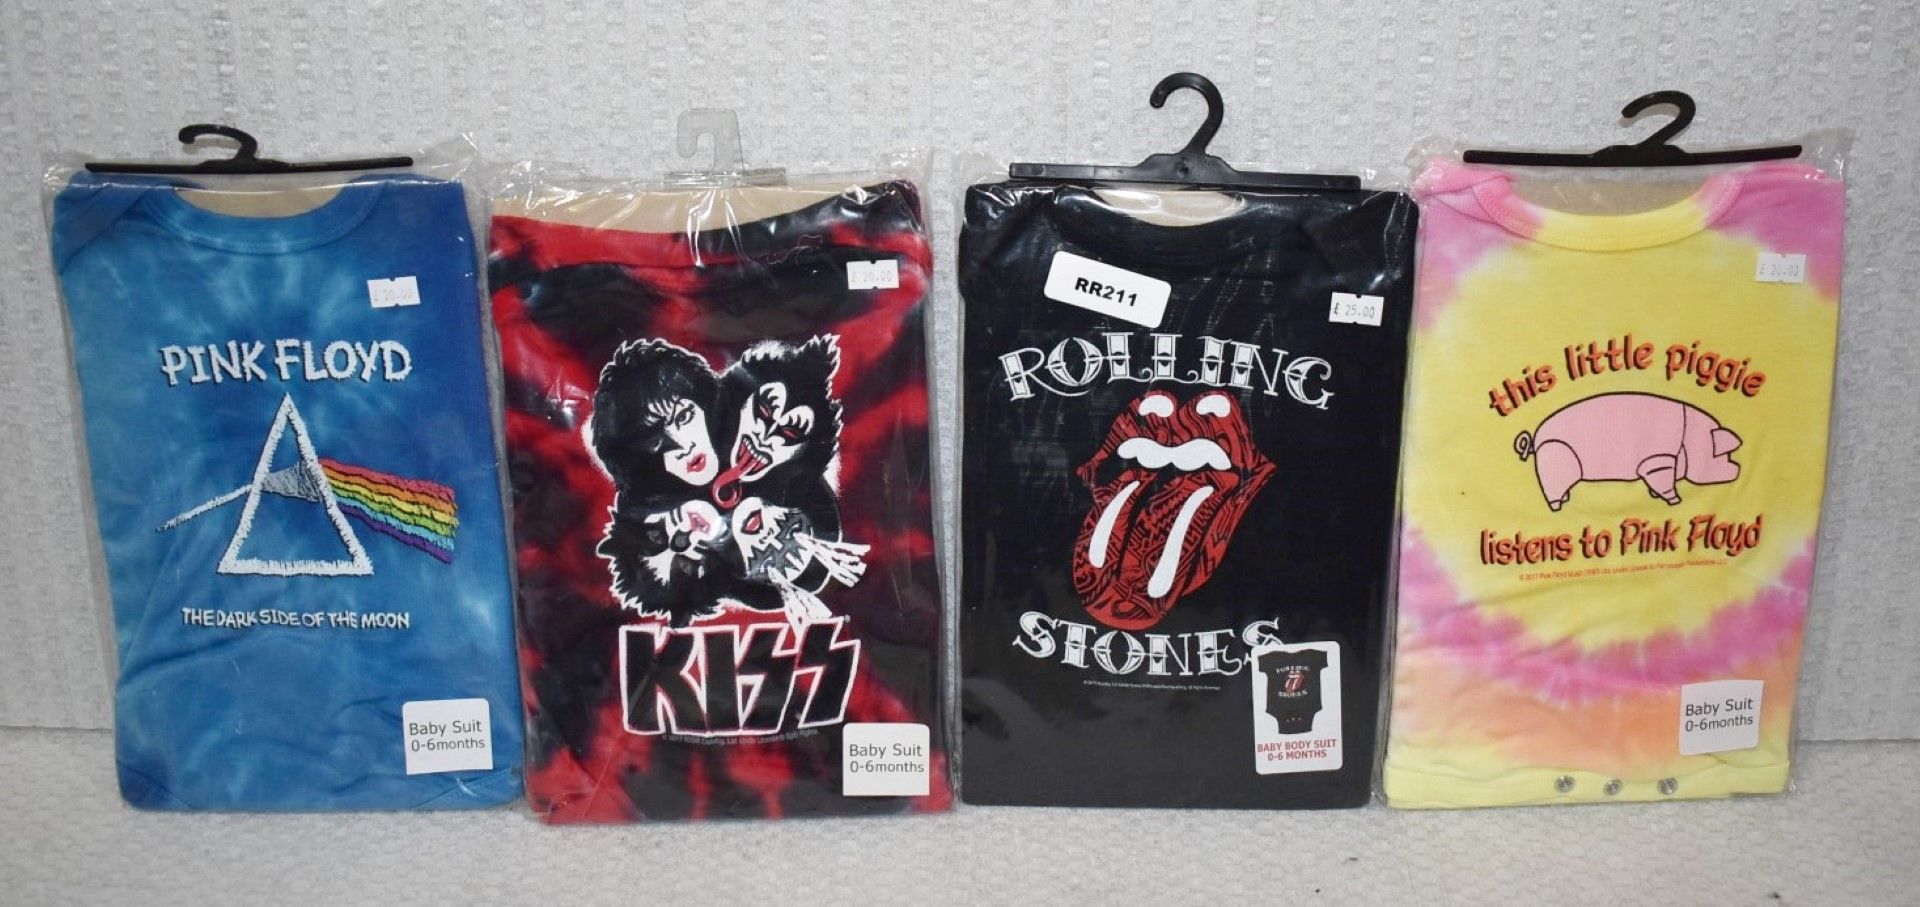 4 x Rock n Roll Themed Baby Suits - For Ages 0-6 Months - Features Pink Floyd, Kiss and Rolling